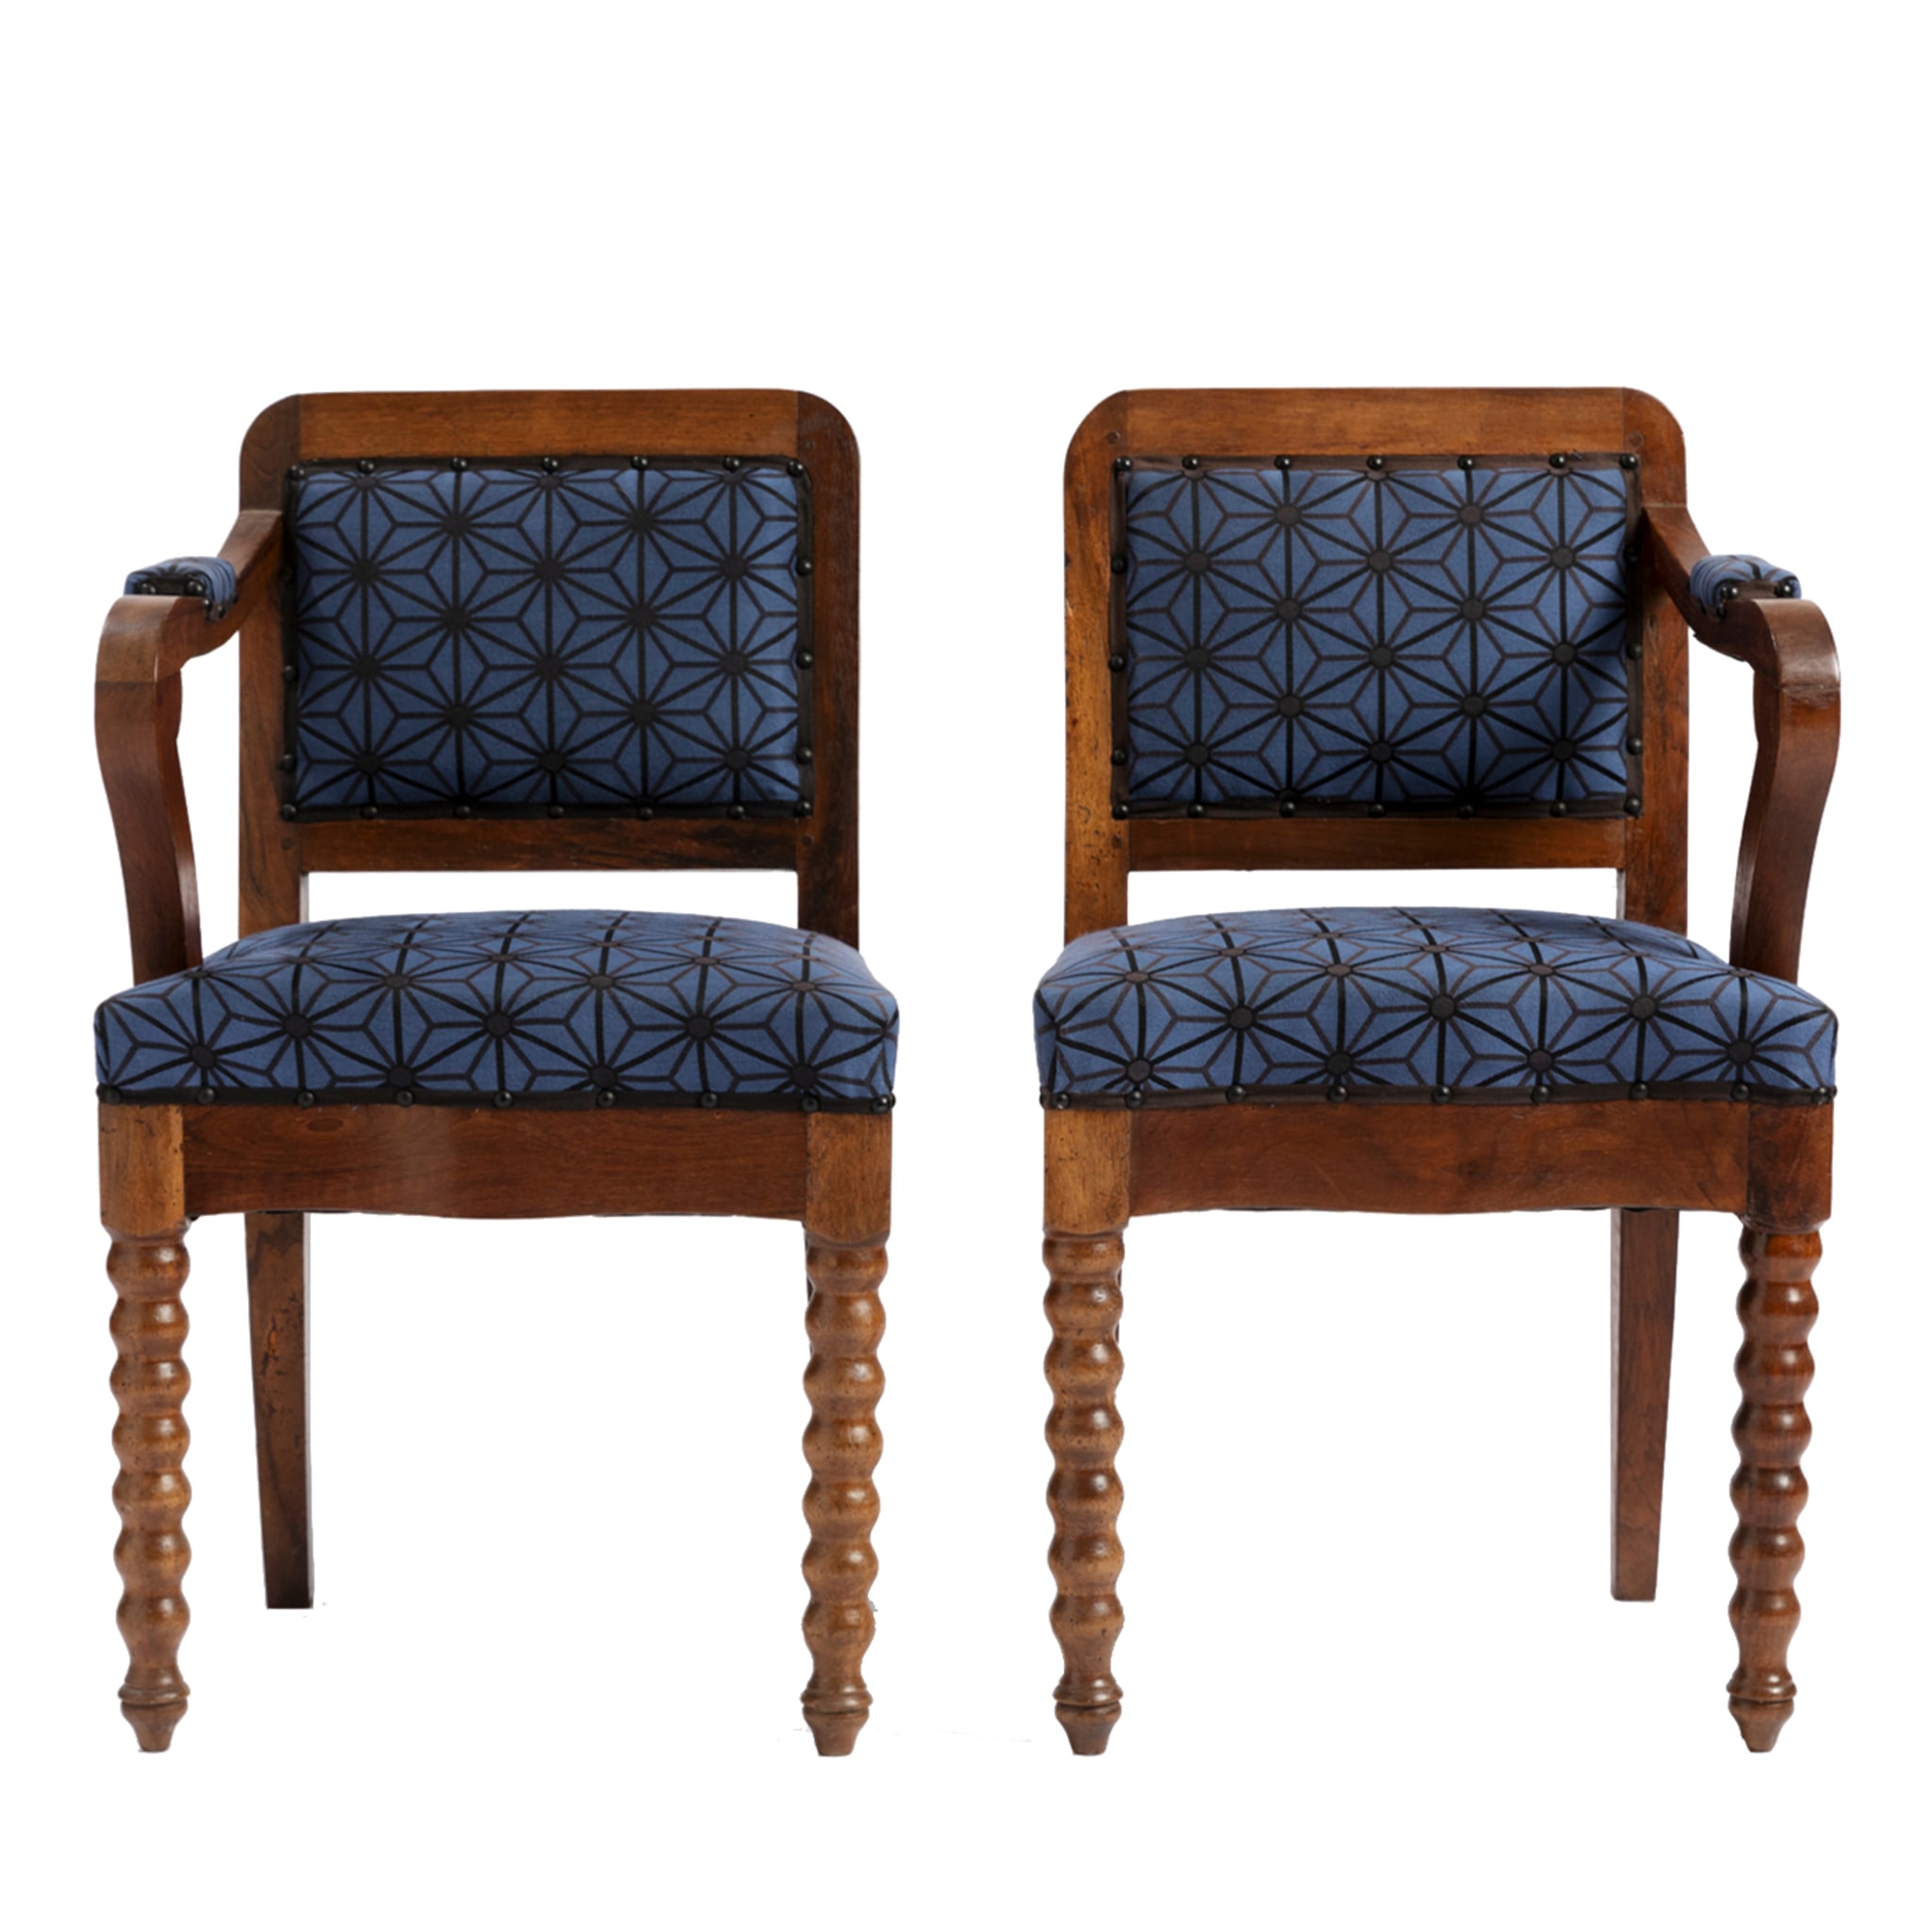 Le Chiacchiere - Set of 2 chairs - Main view